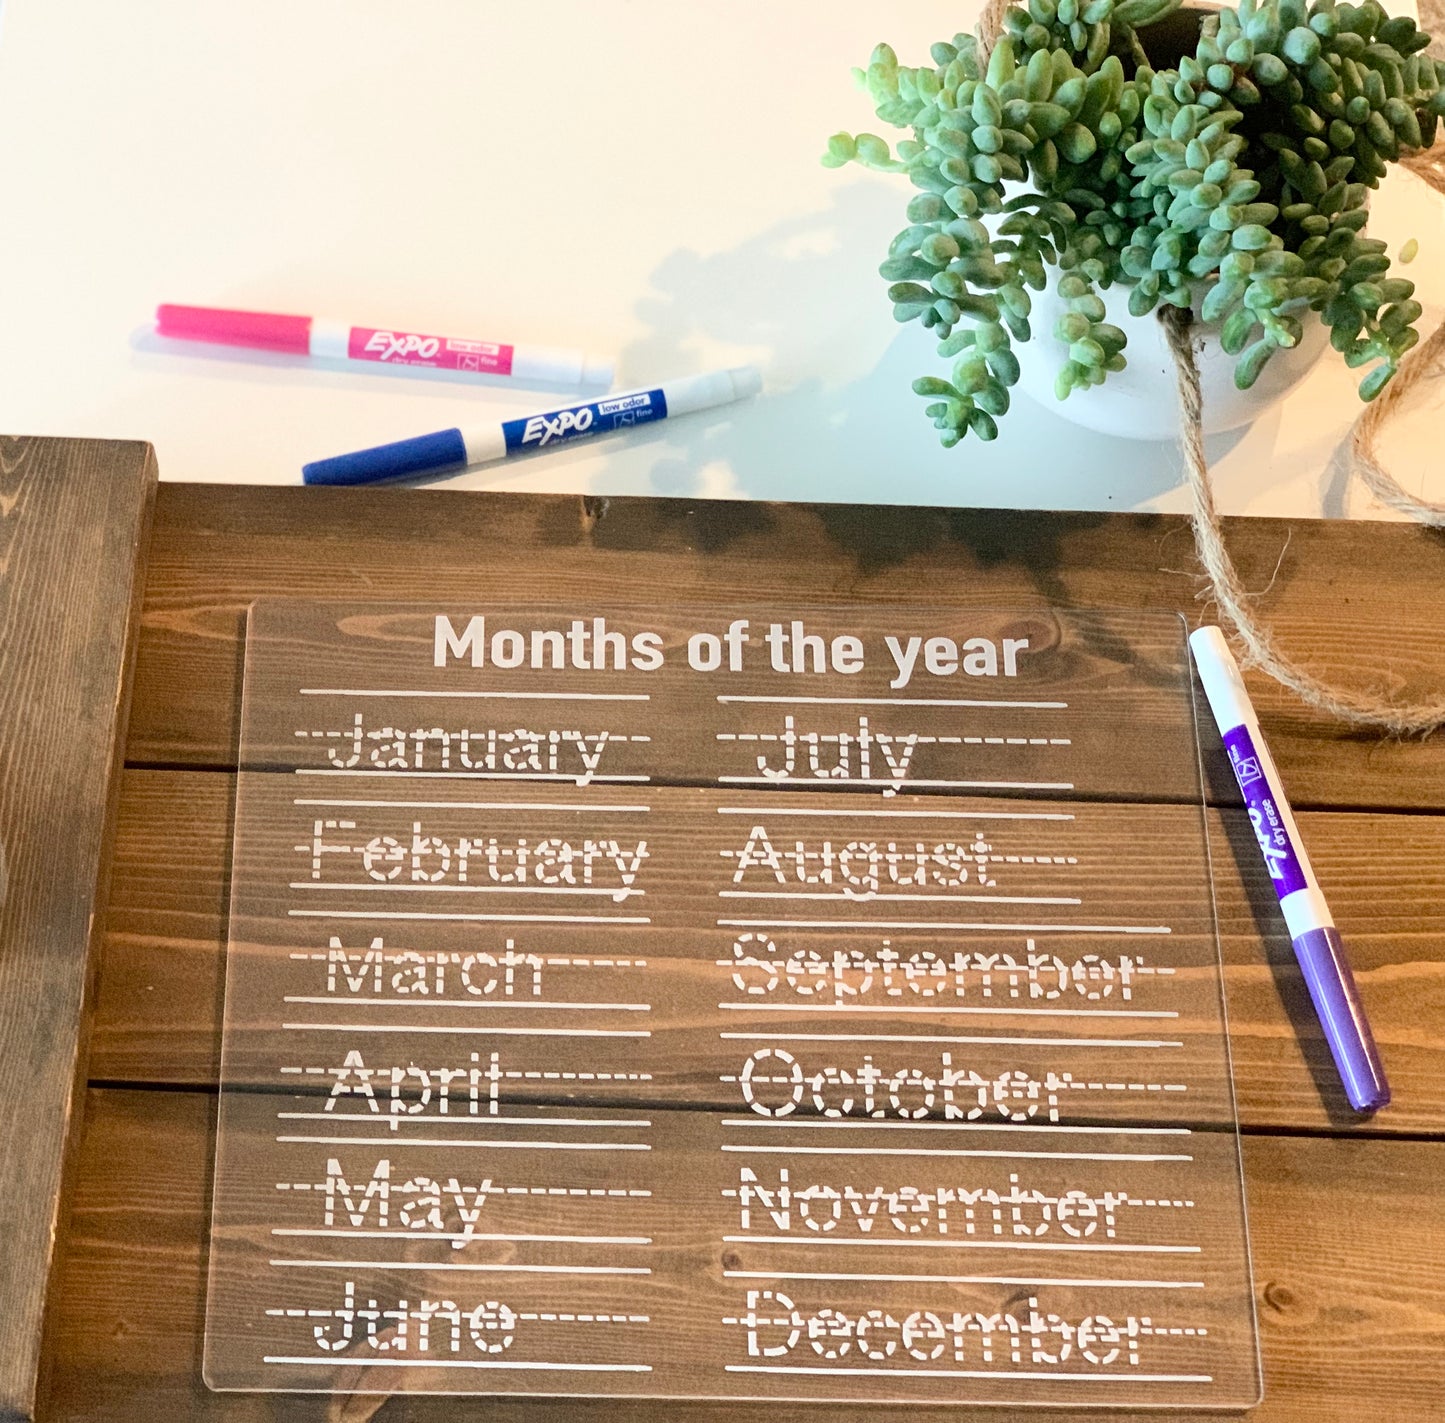 Months of the Year Acrylic Dry Erase Board